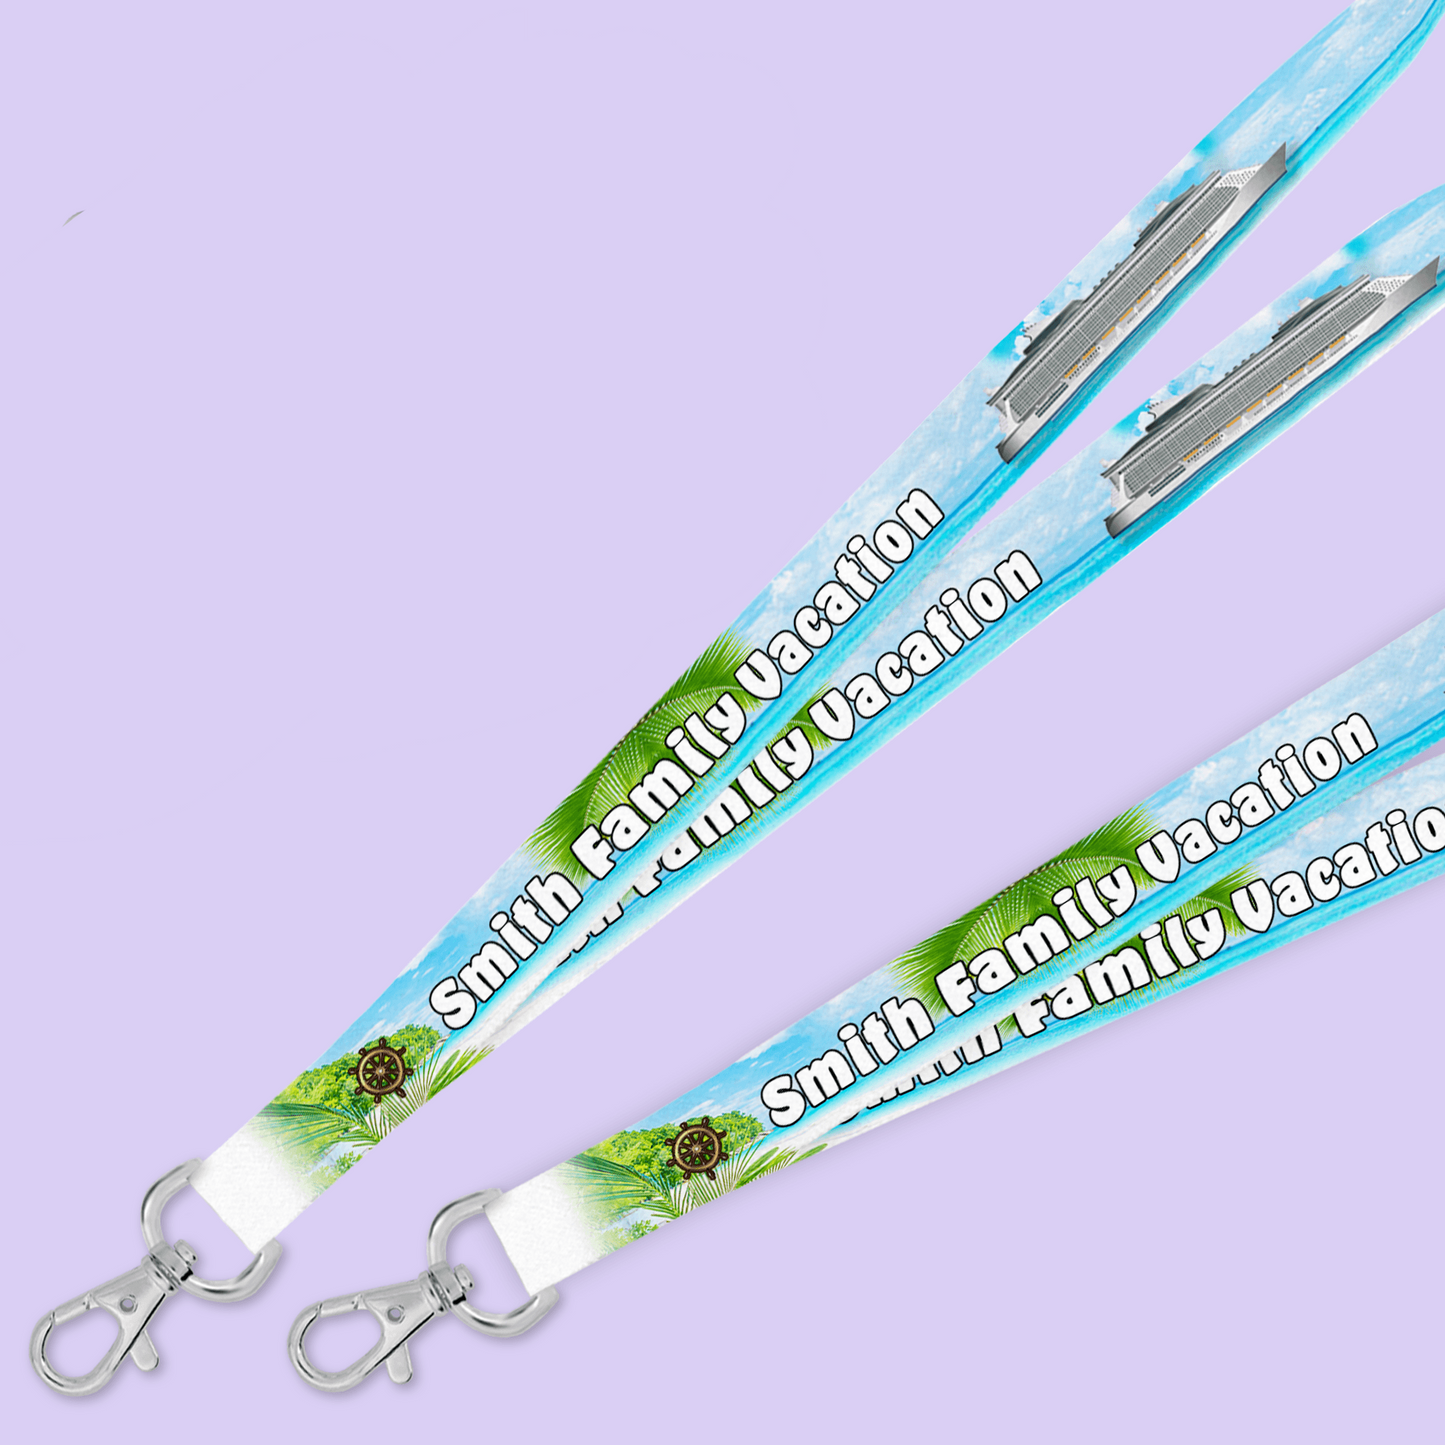 Personalized Cruise Lanyard - Two Crafty Gays